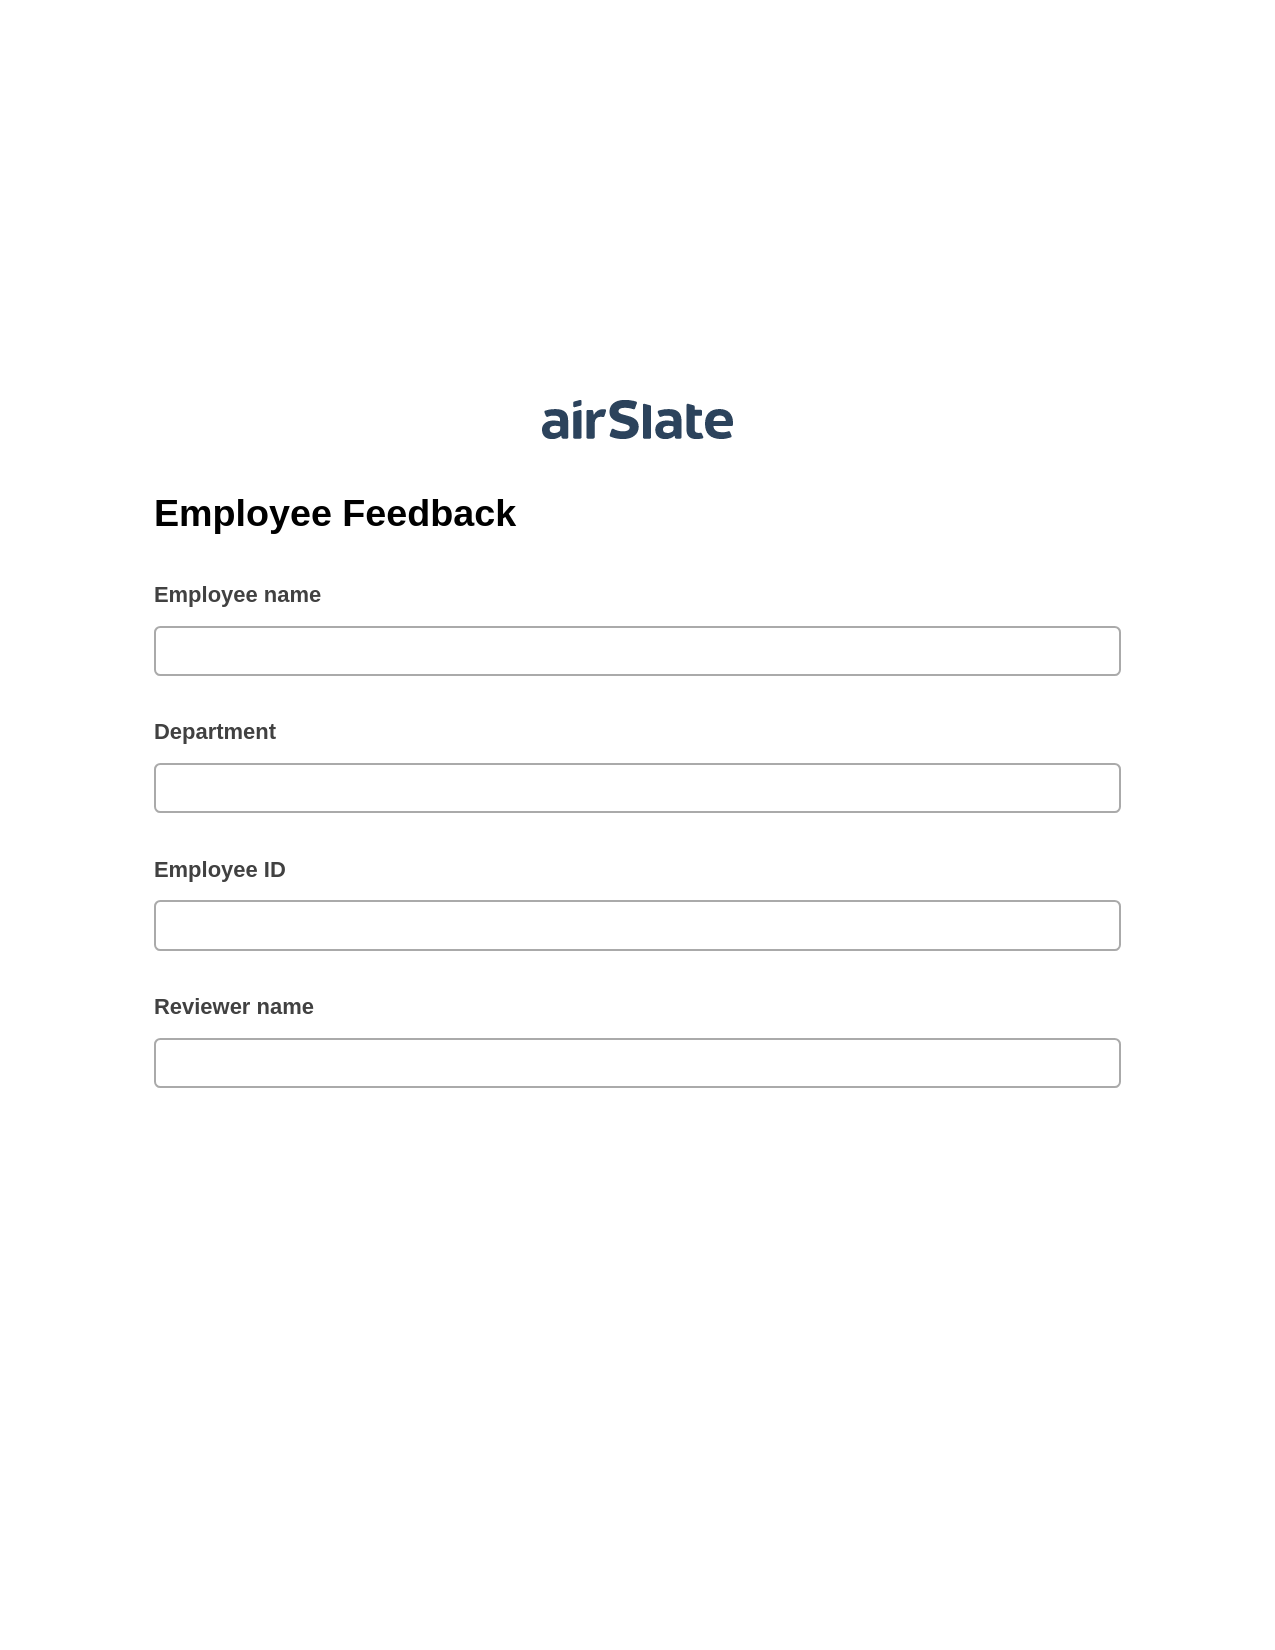 Employee Feedback Pre-fill from Excel Spreadsheet Bot, Send a Slate with Roles Bot, Webhook Postfinish Bot